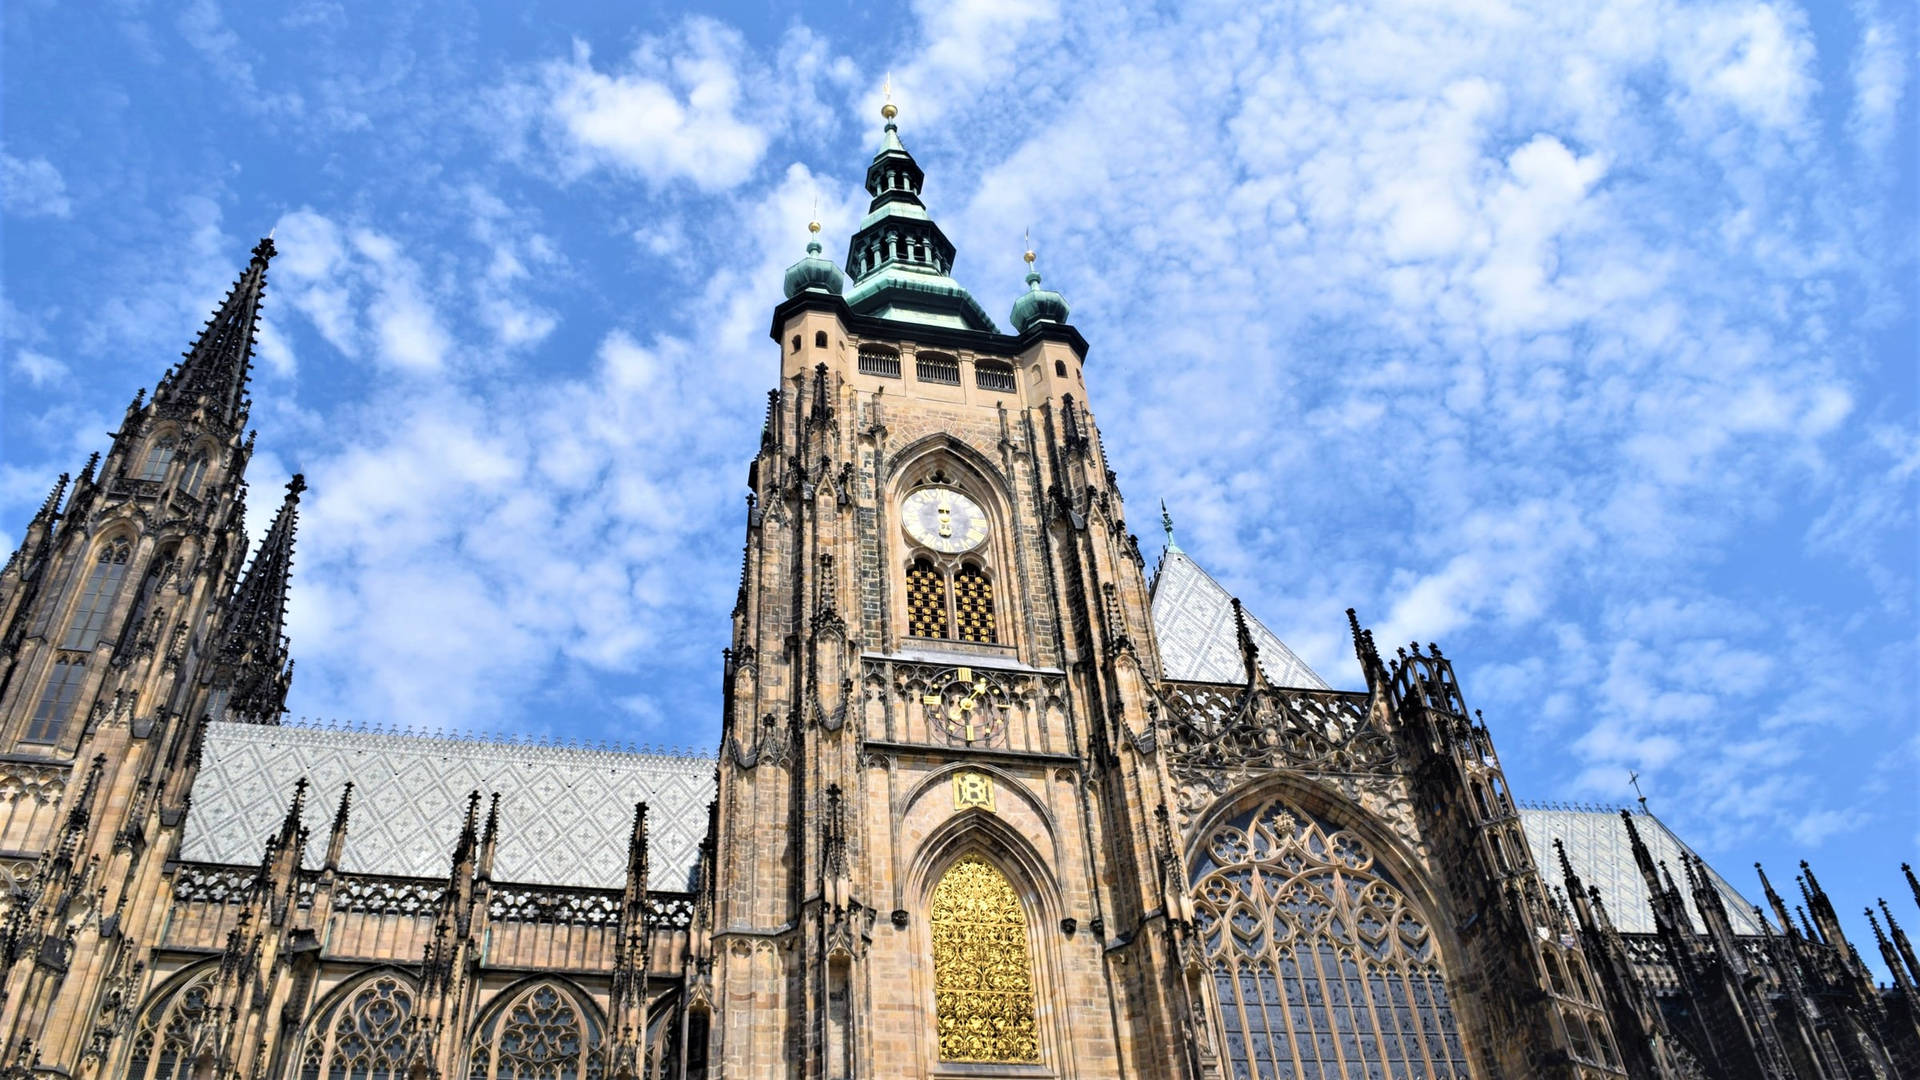 St. Vitus Cathedral Czech Republic Background